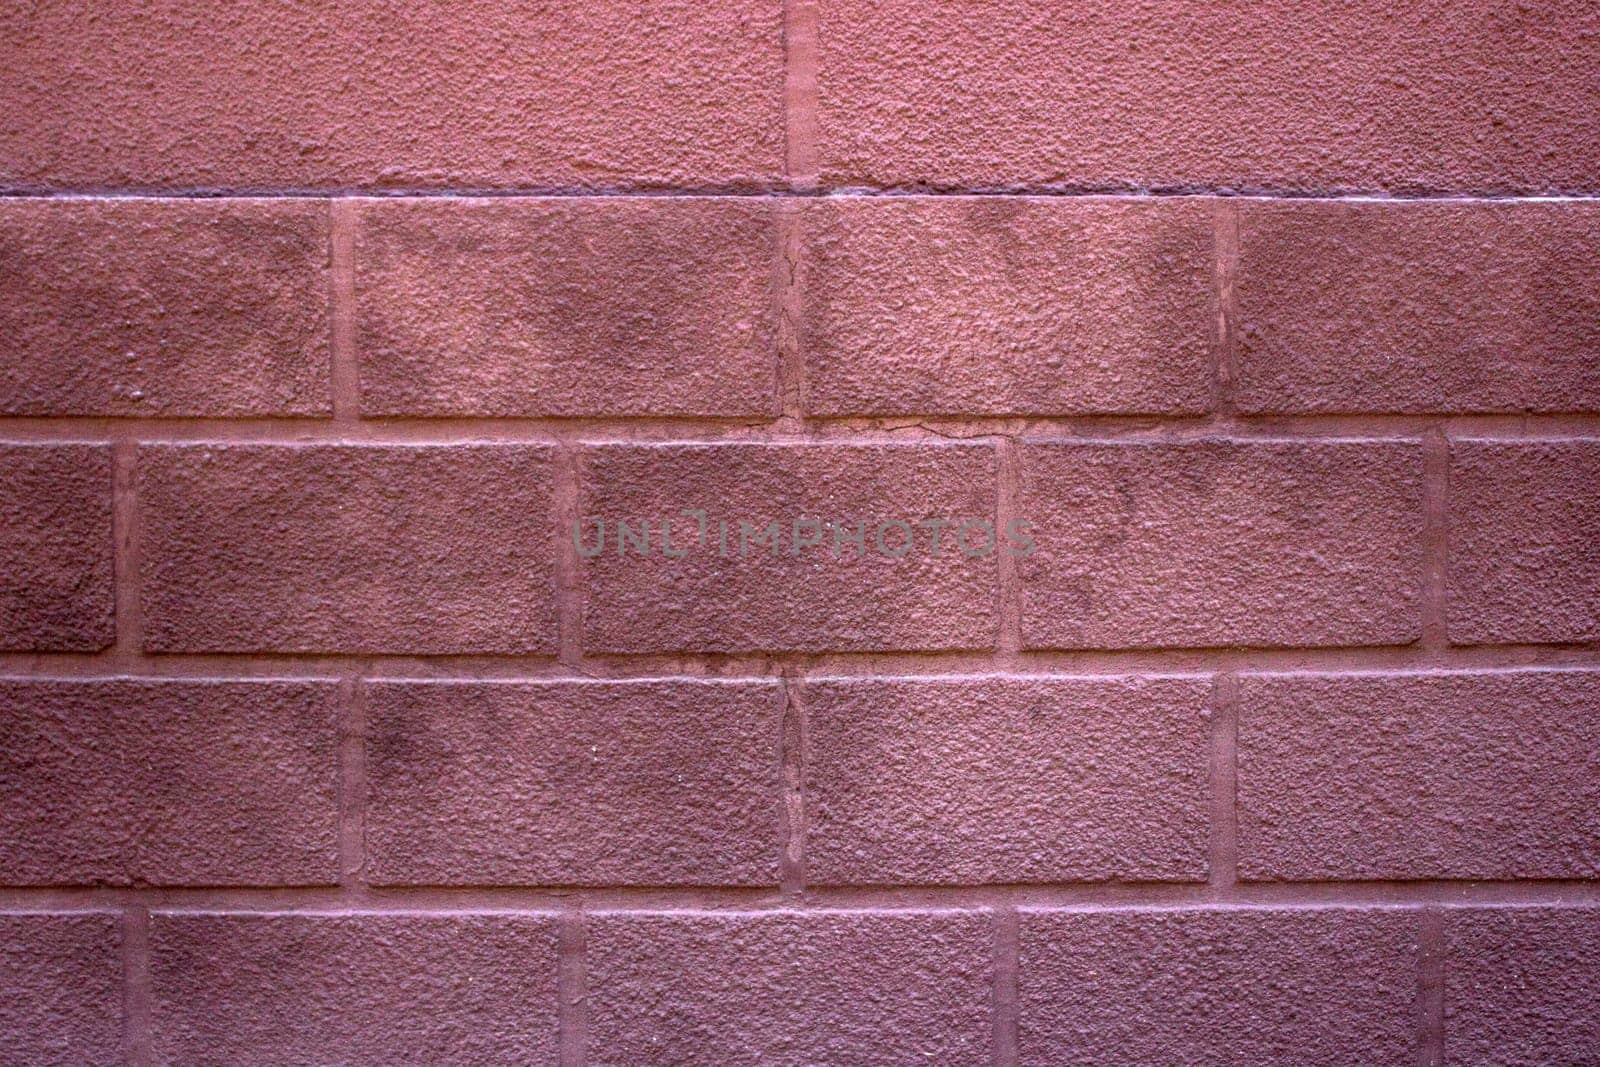 Seamless red painted brick wall texture. Pale colors by Snegok1967